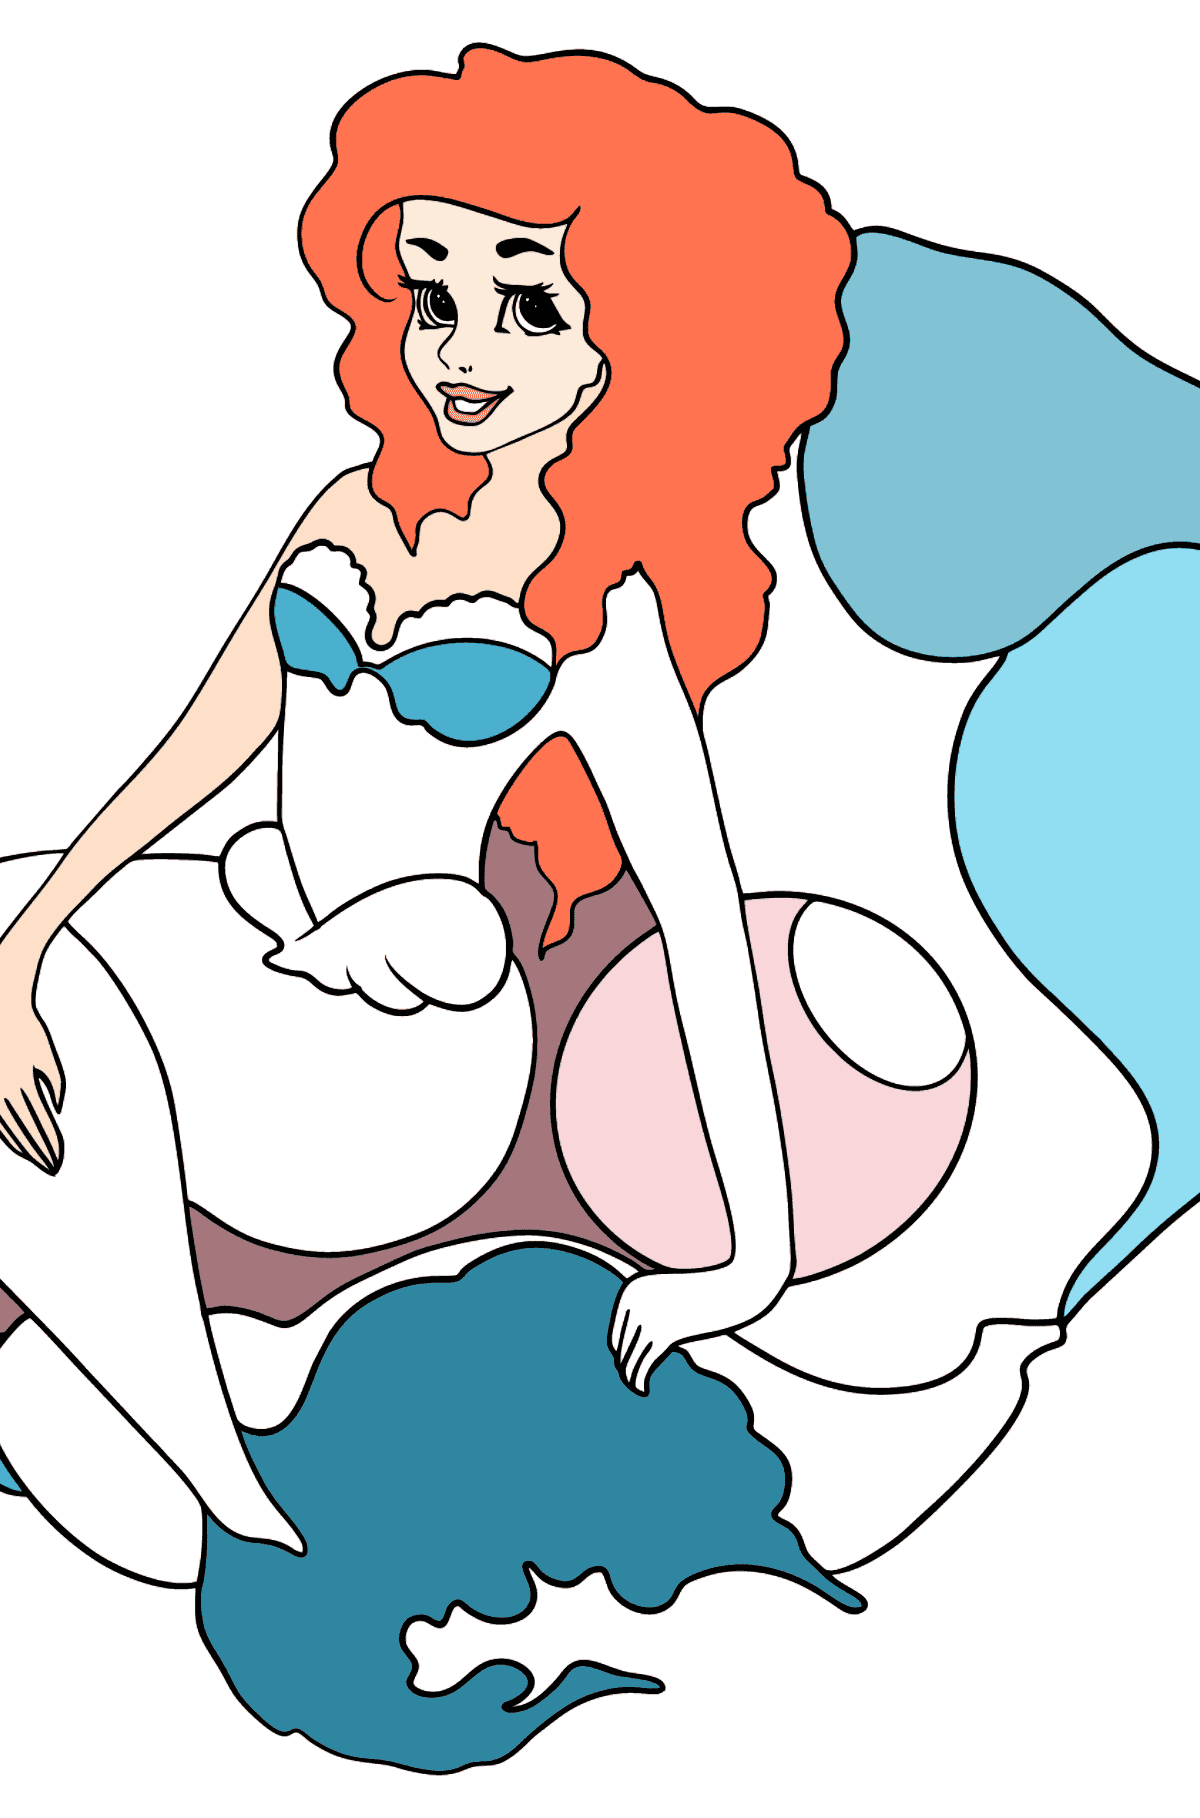 Coloring Page Mermaid and Seashell - Coloring Pages for Kids